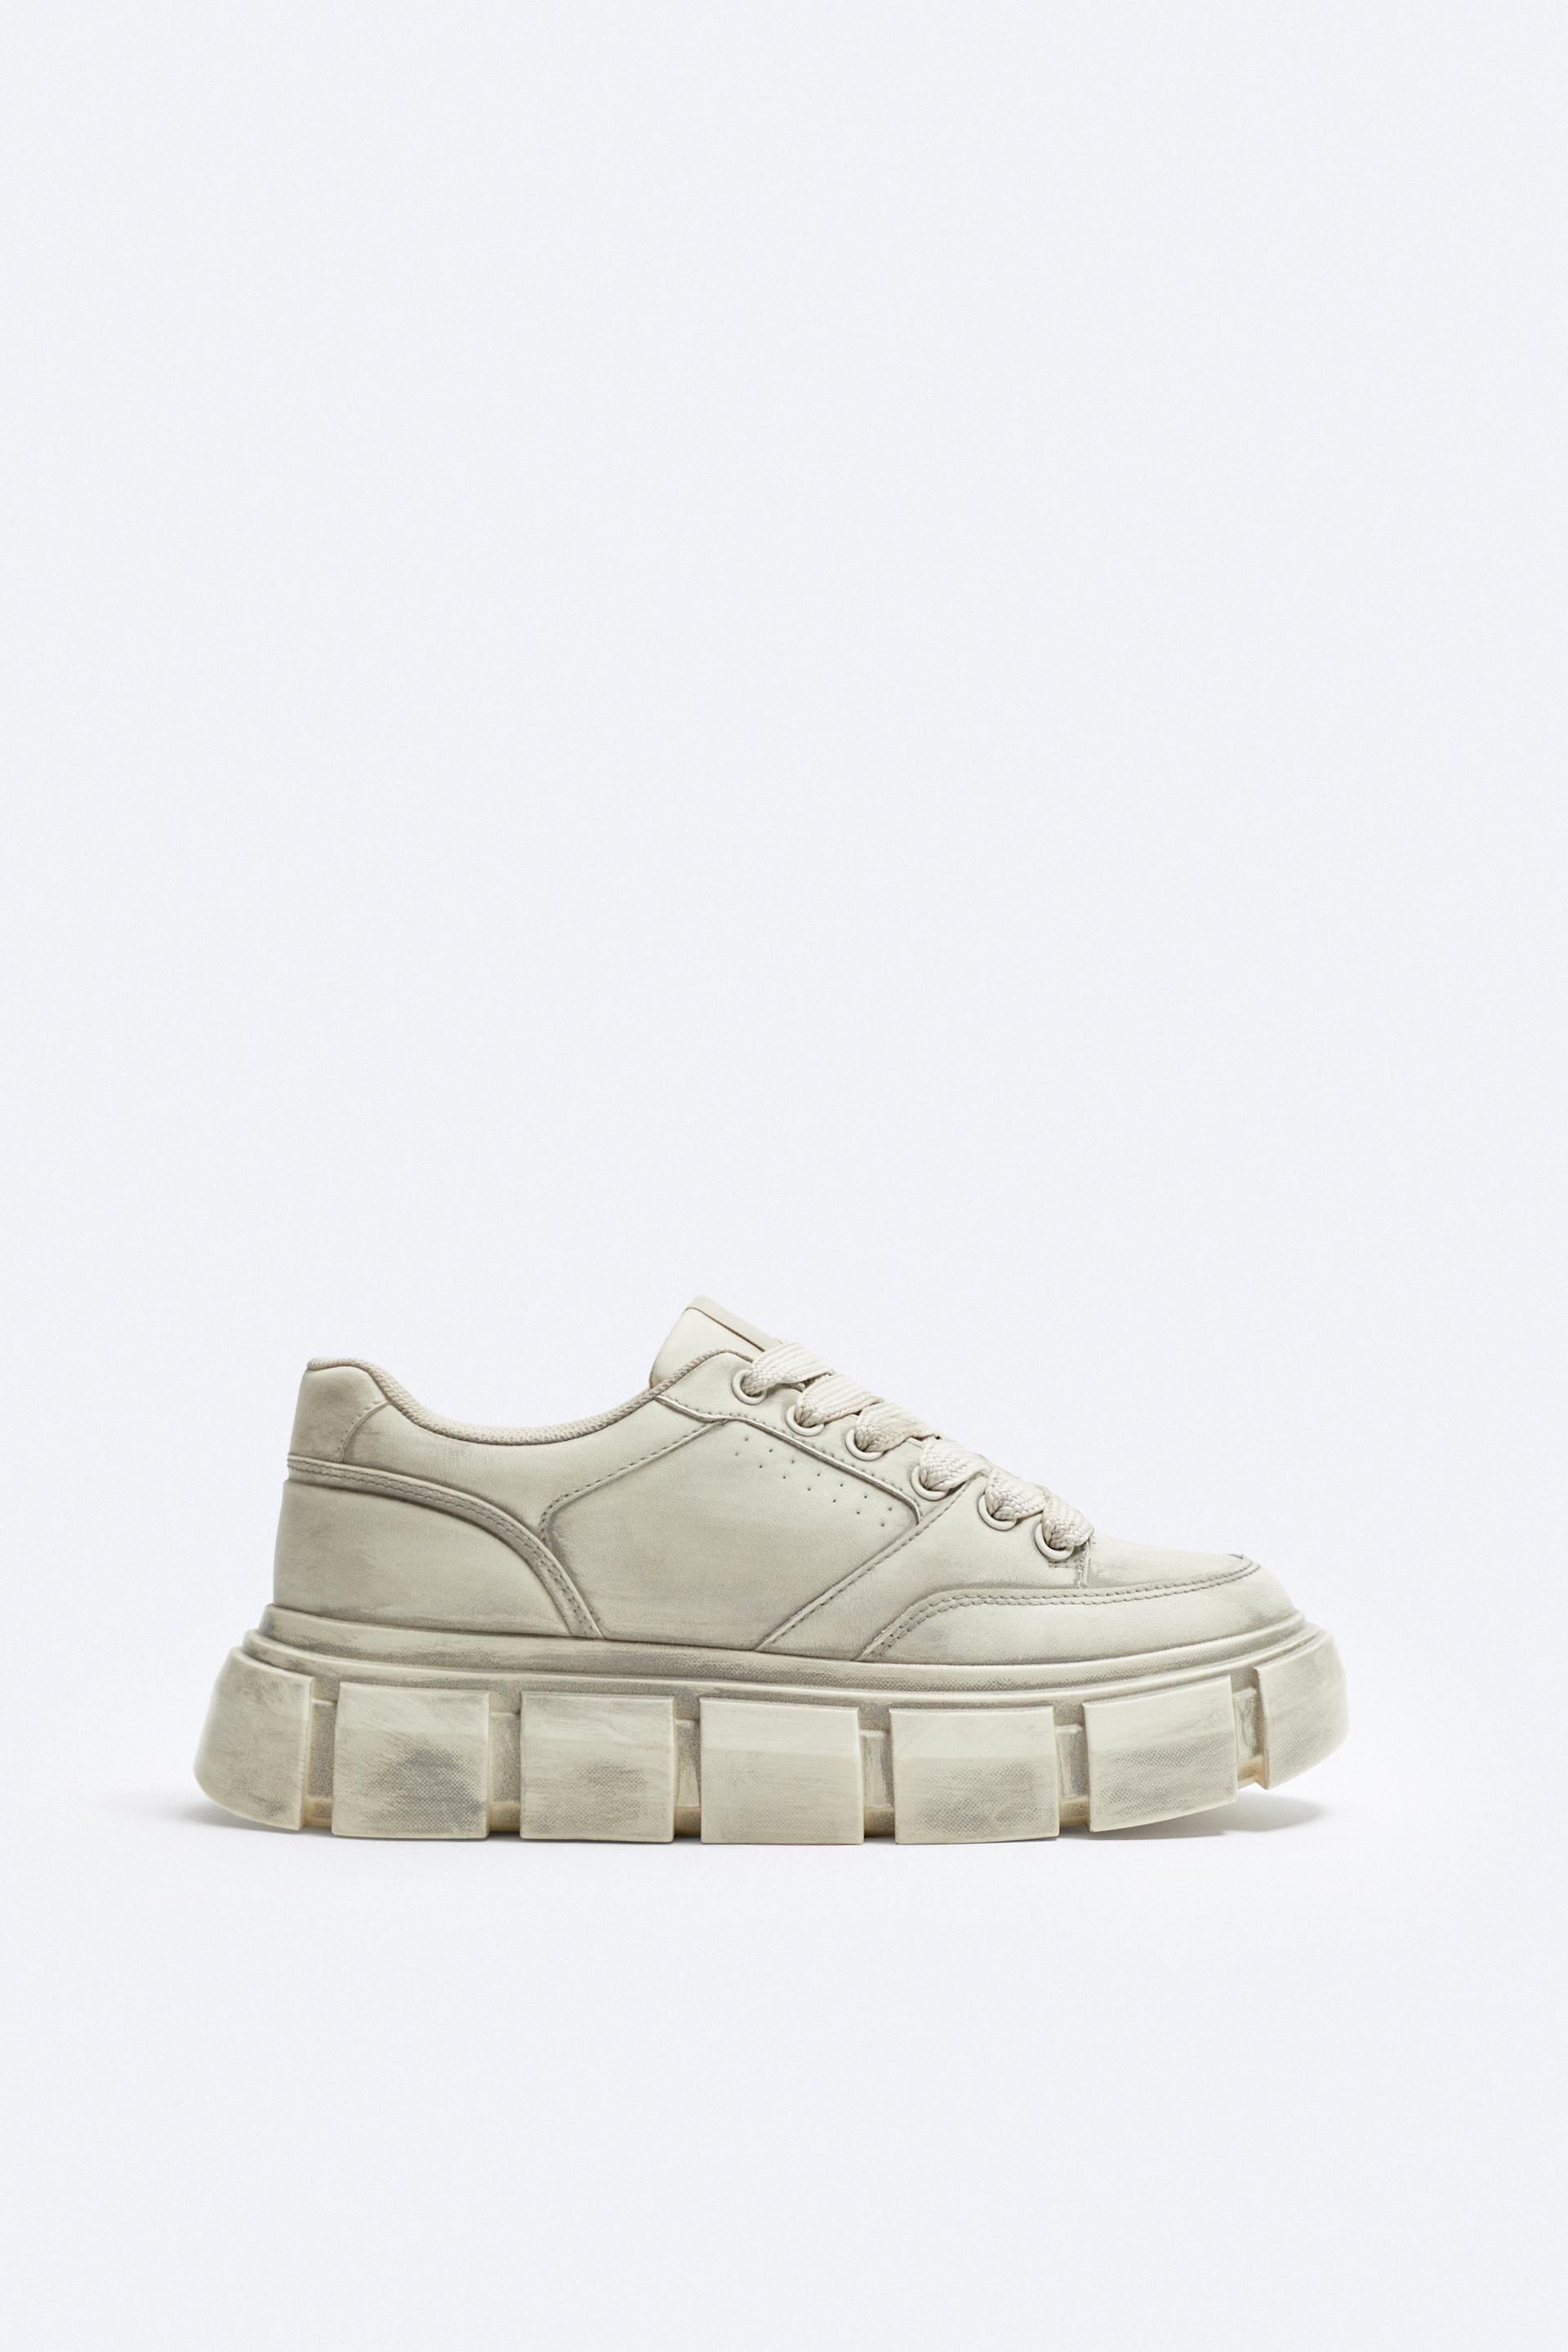 Zara Releases On-Trend Bulky Sneakers — and They're Only $36